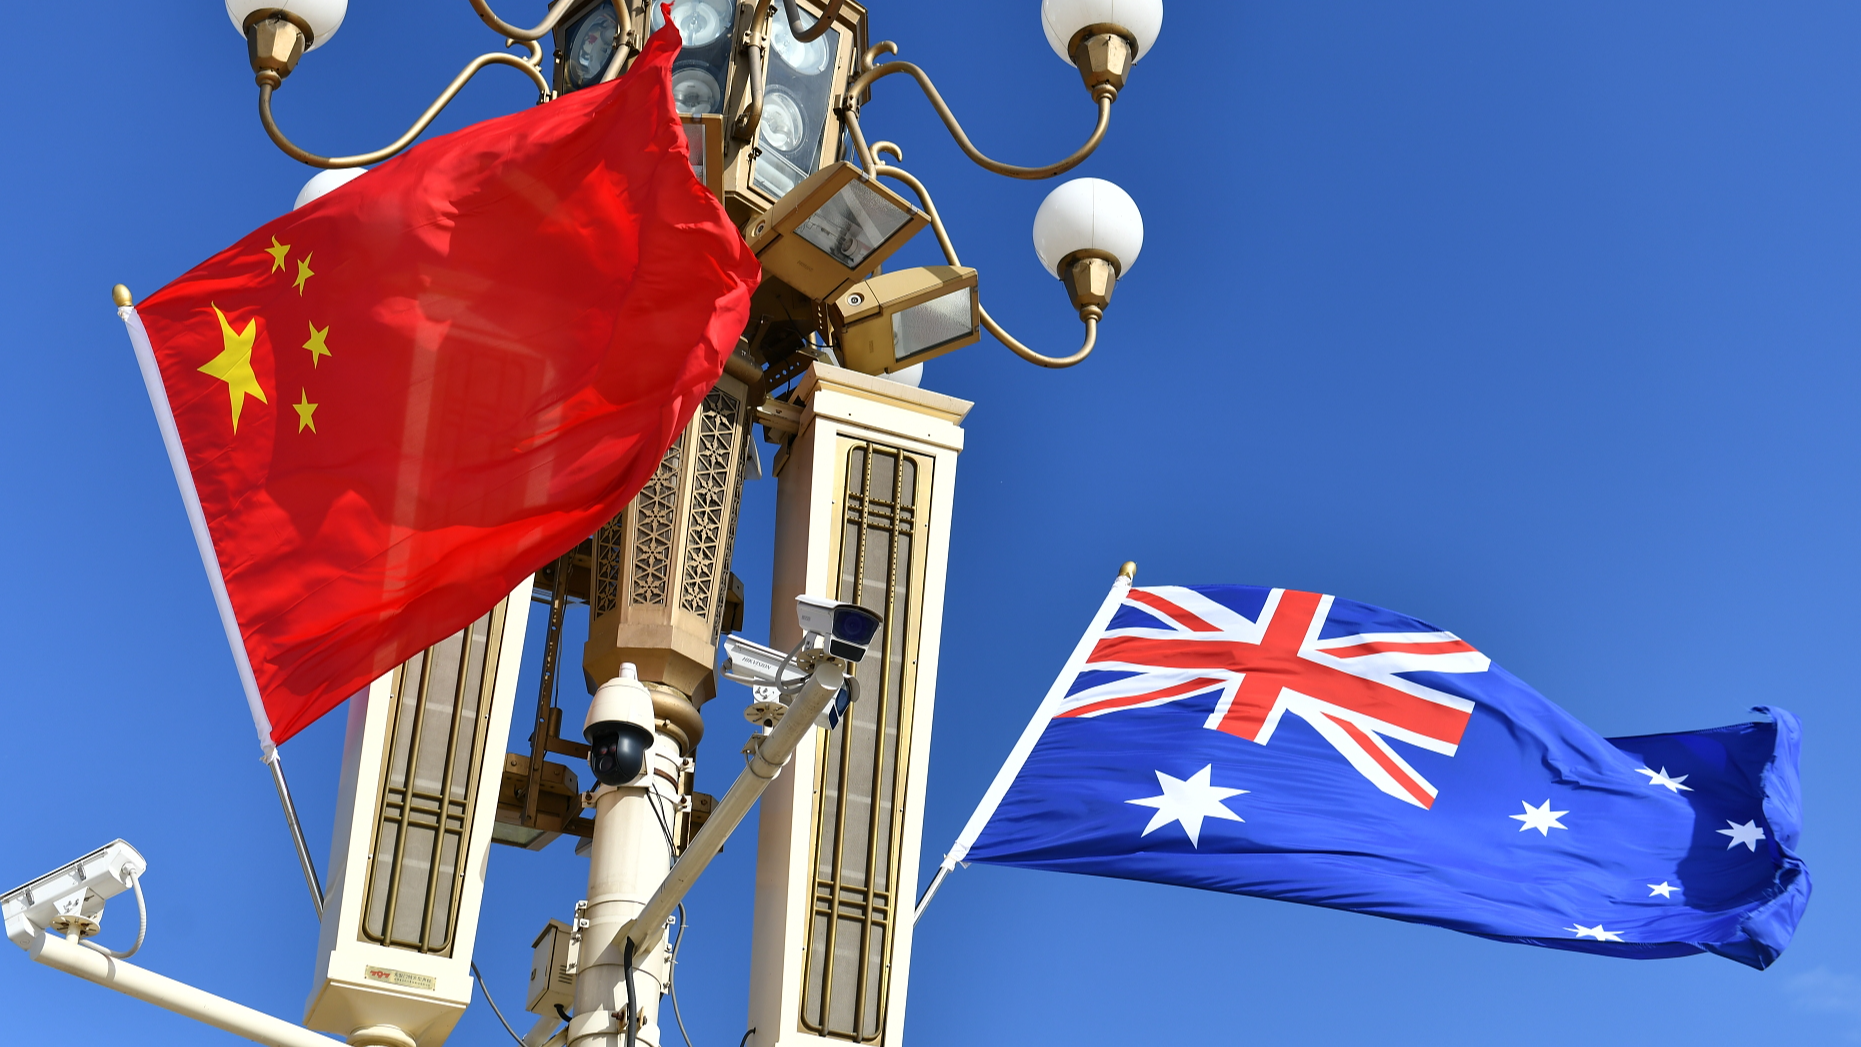 National flags of China and Australia. /CFP